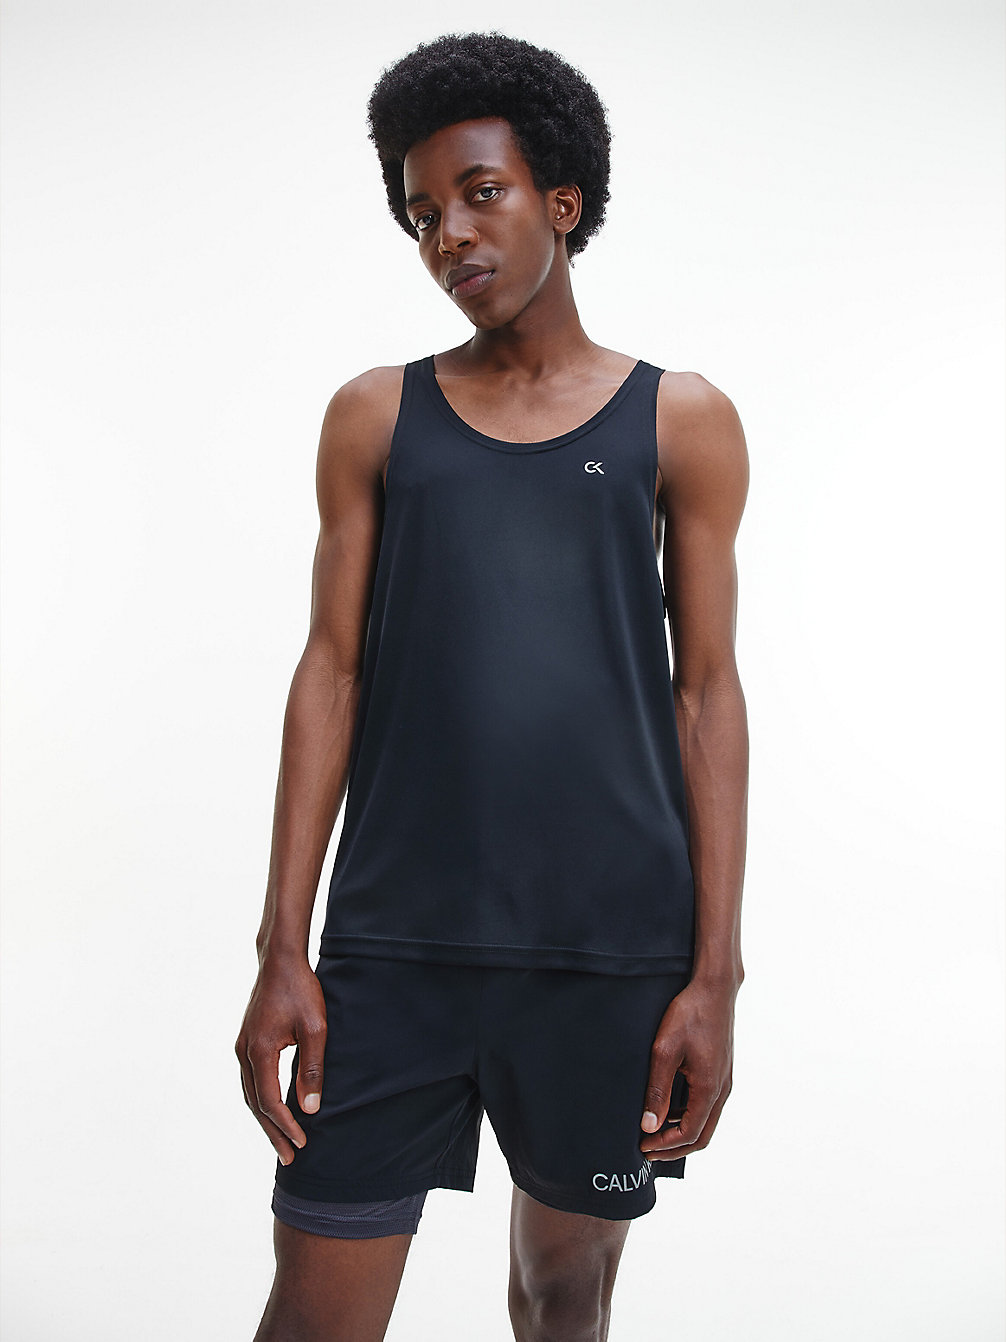 CK BLACK Recycled Polyester Gym Tank Top undefined men Calvin Klein